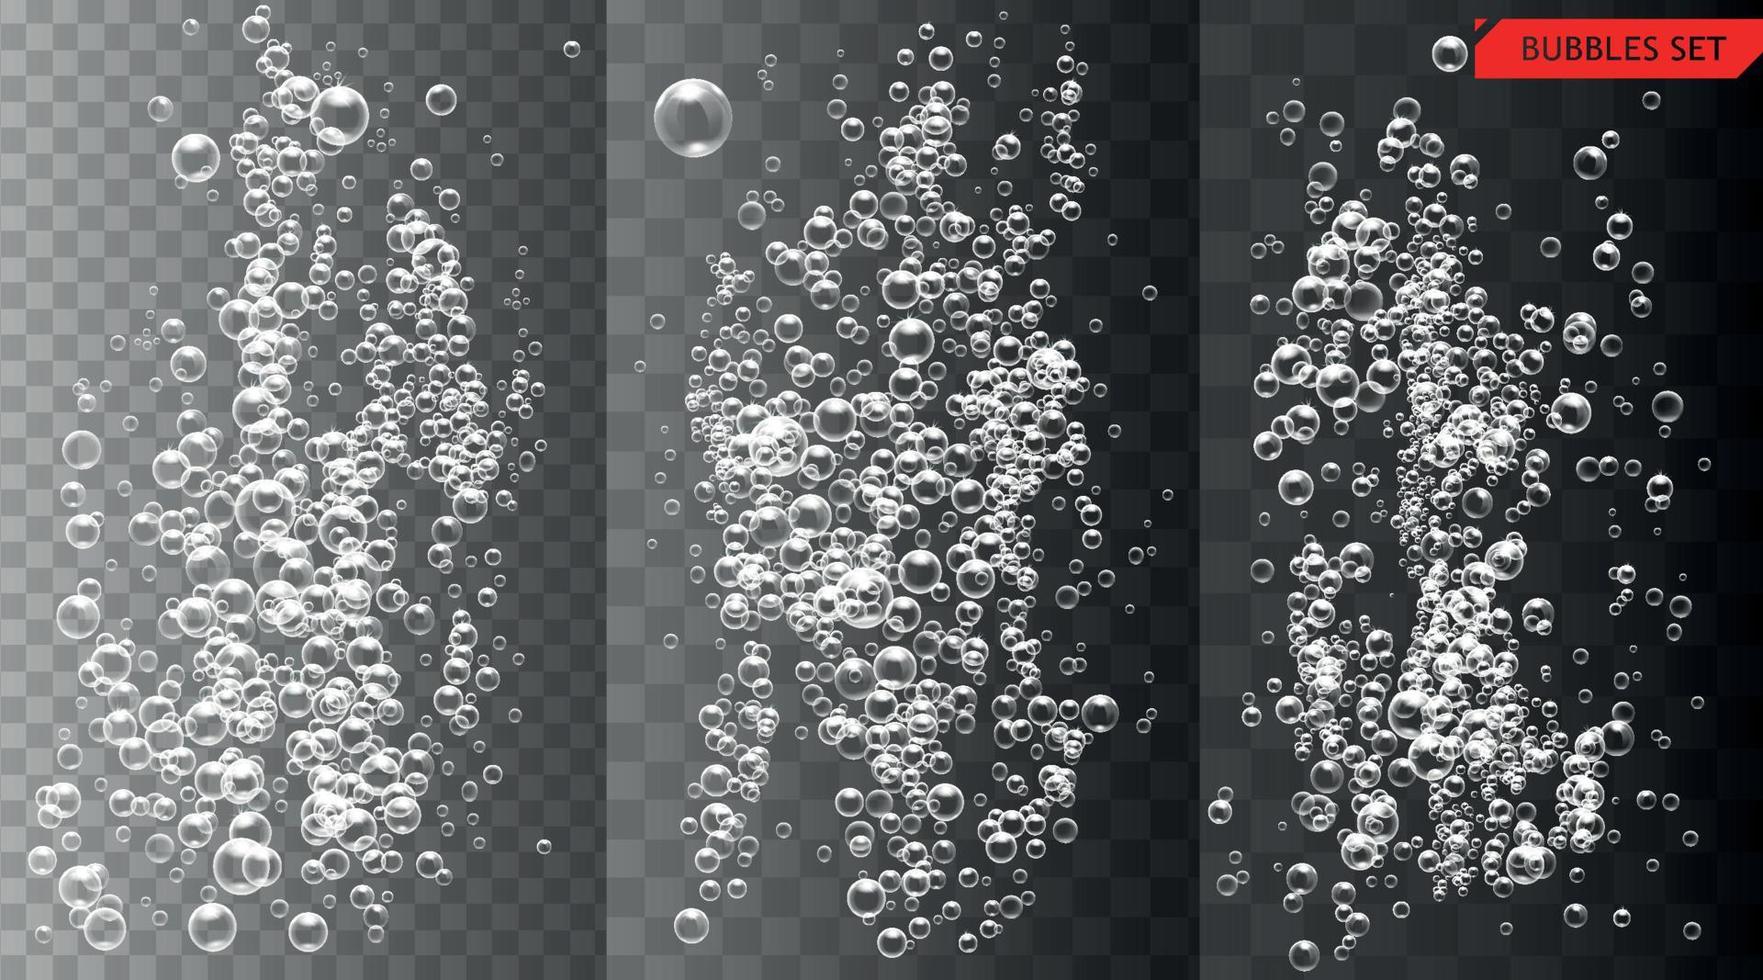 Set of bubbles under water isolated vector illustration